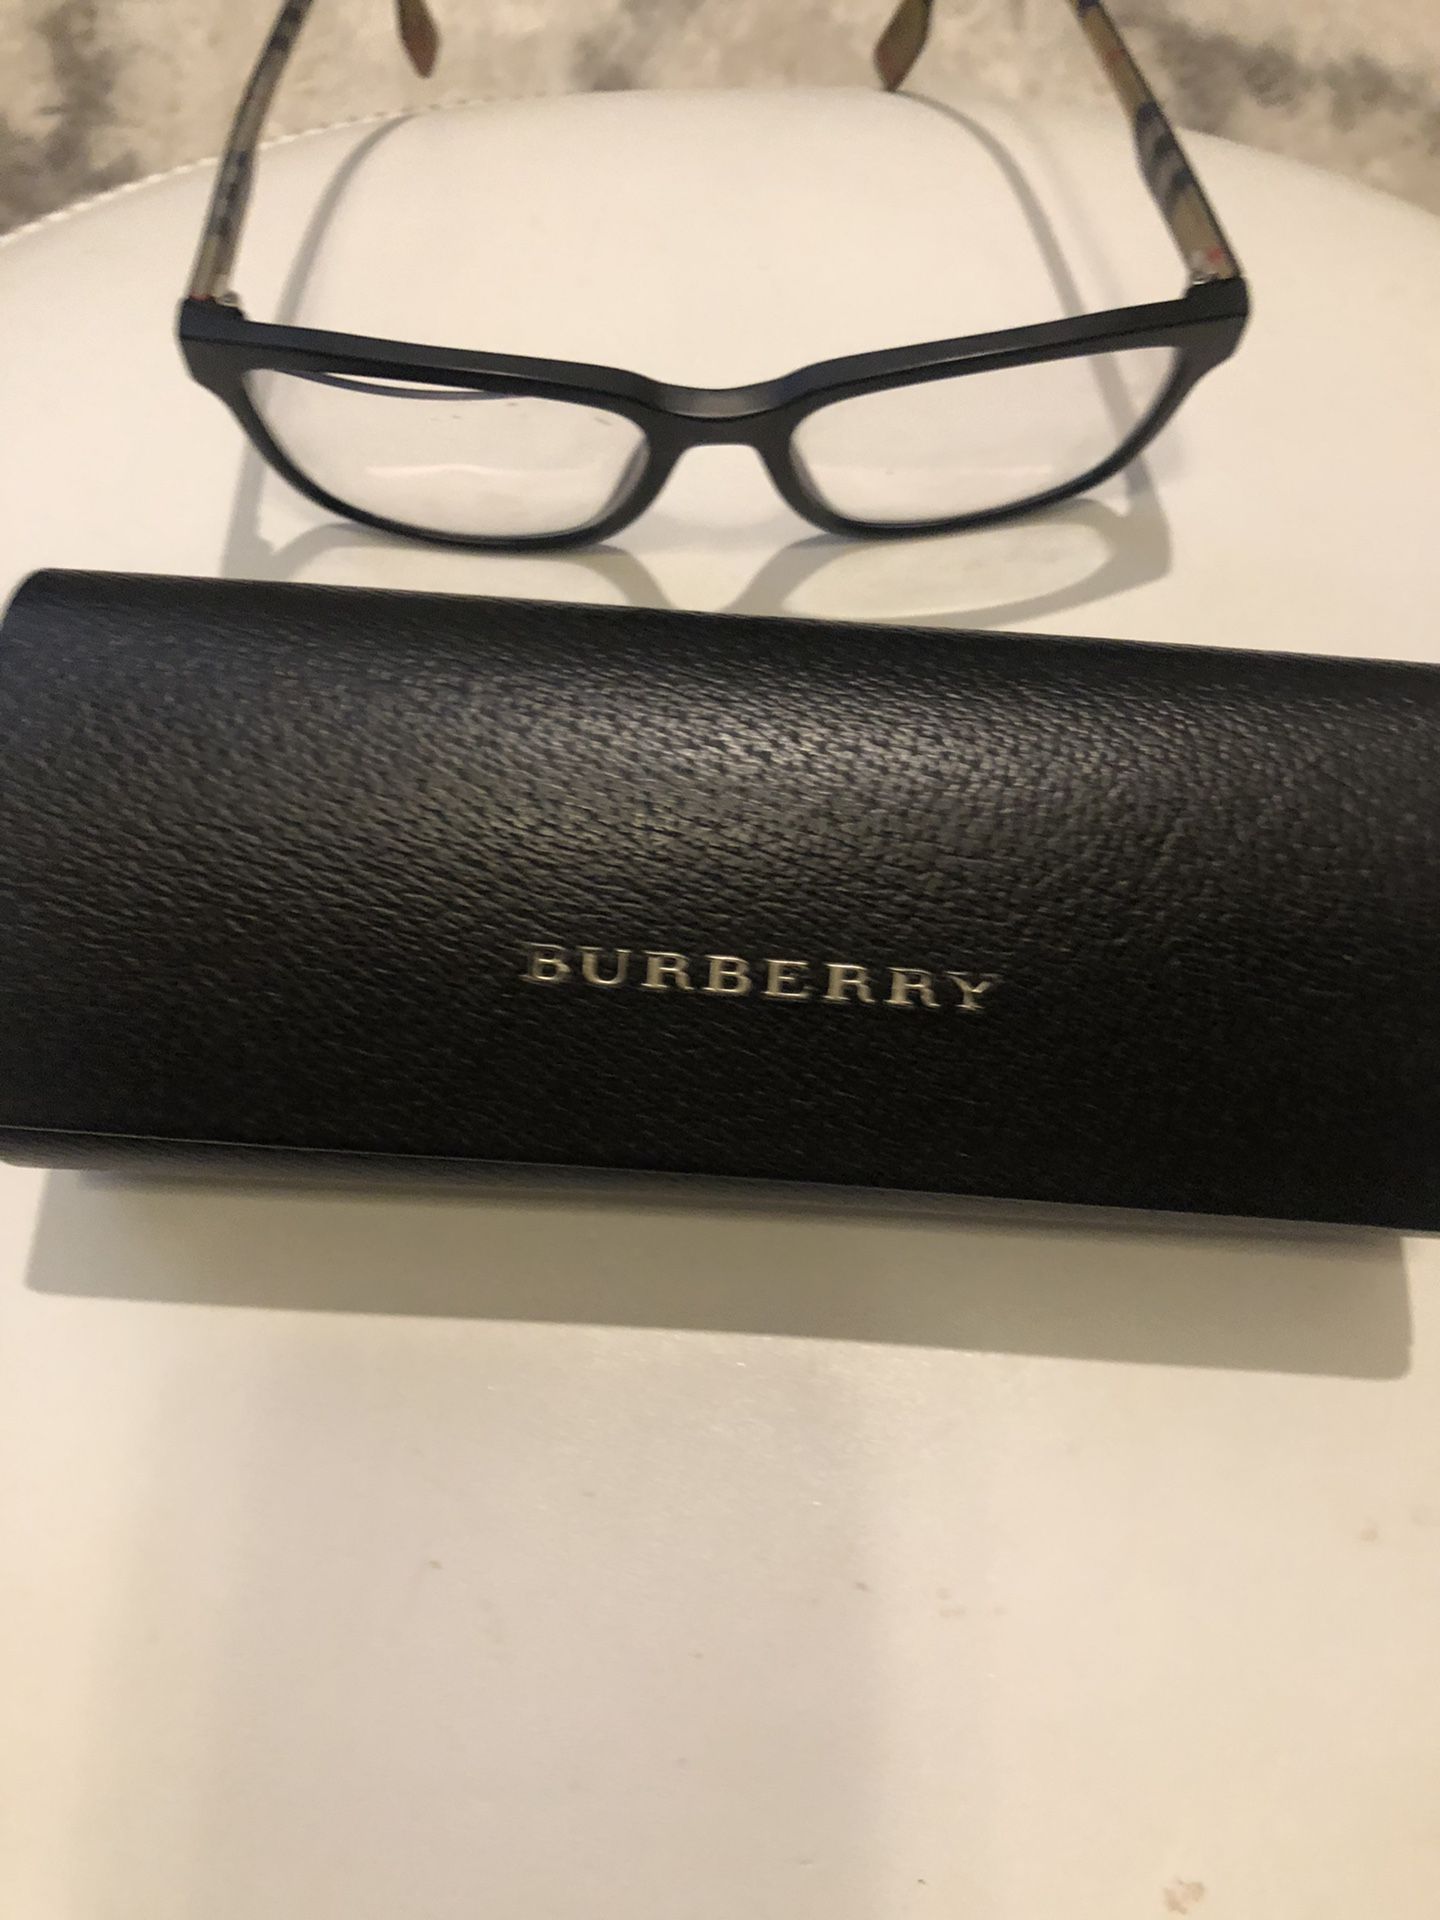 Burberry Read Glases Like New Real 